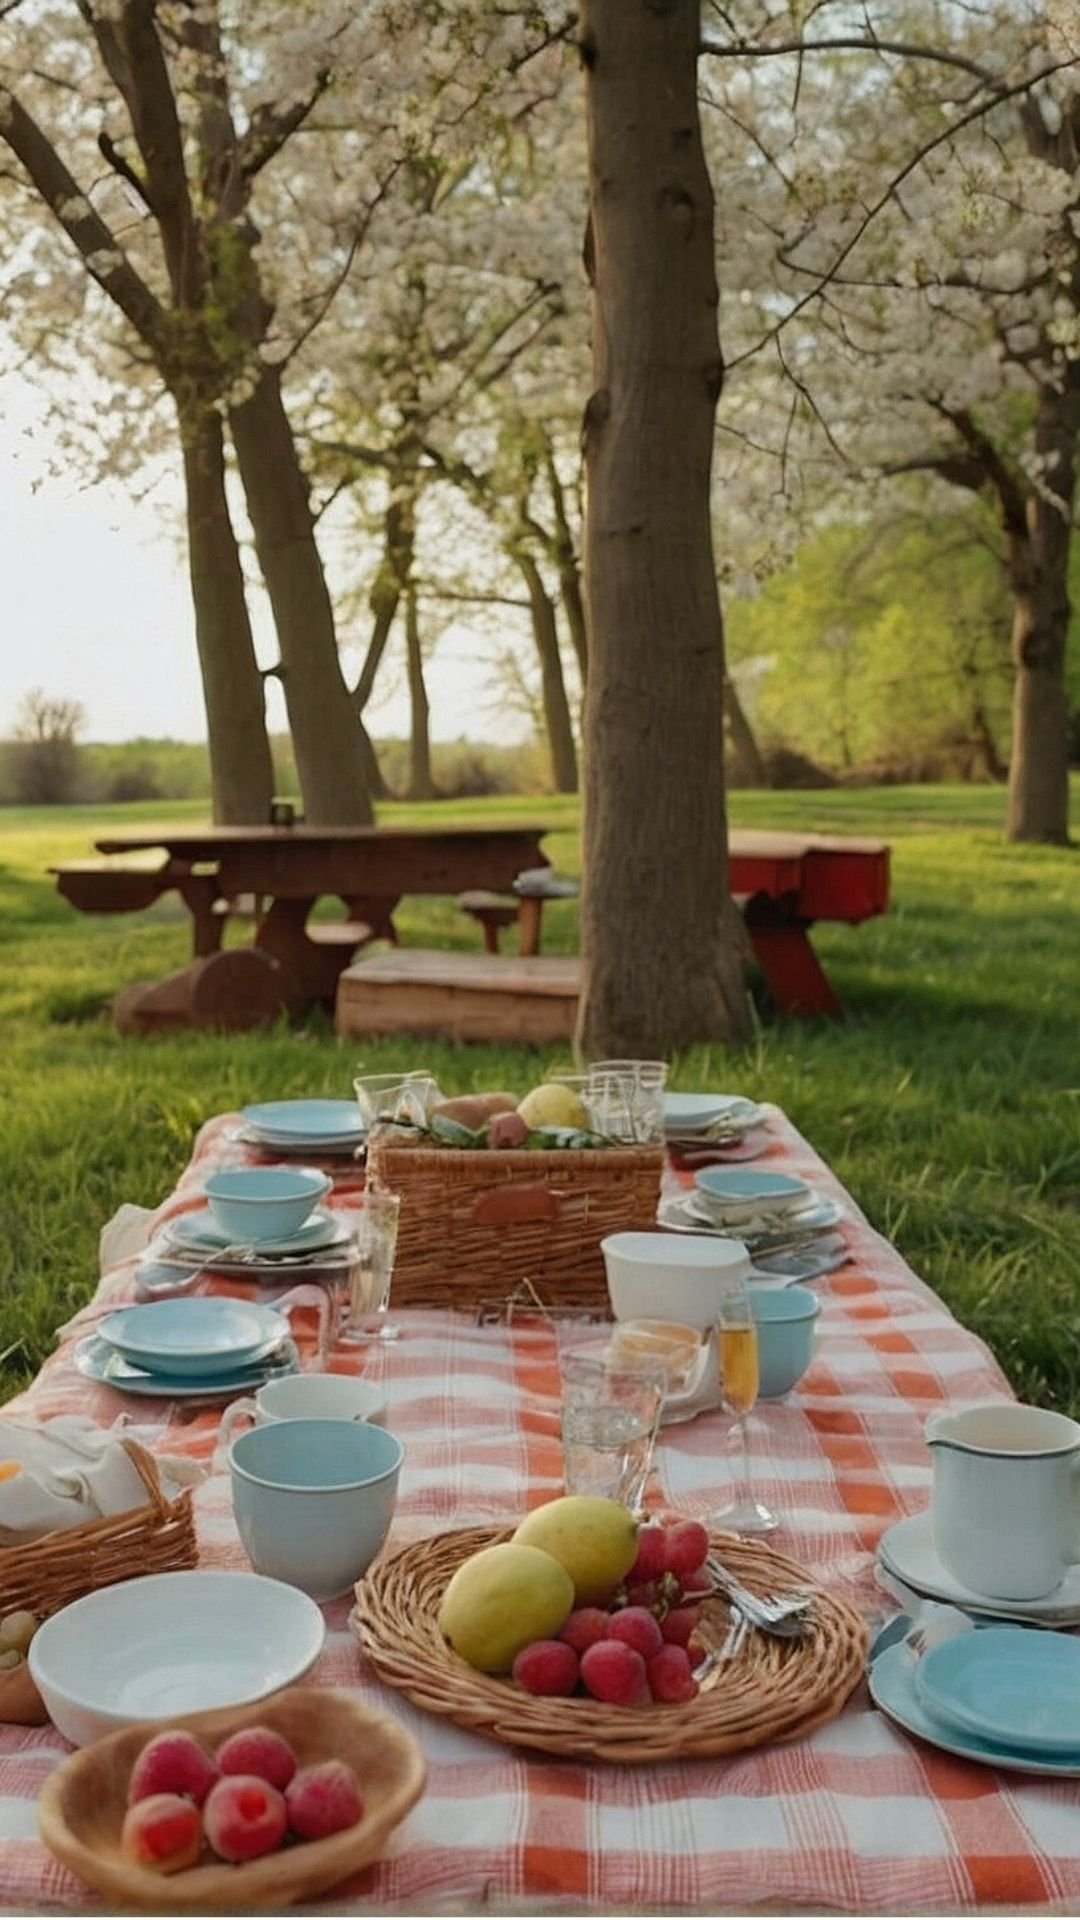 Idyllic Orchard Picnic: Friends, Fruit, and Florals Wallpaper